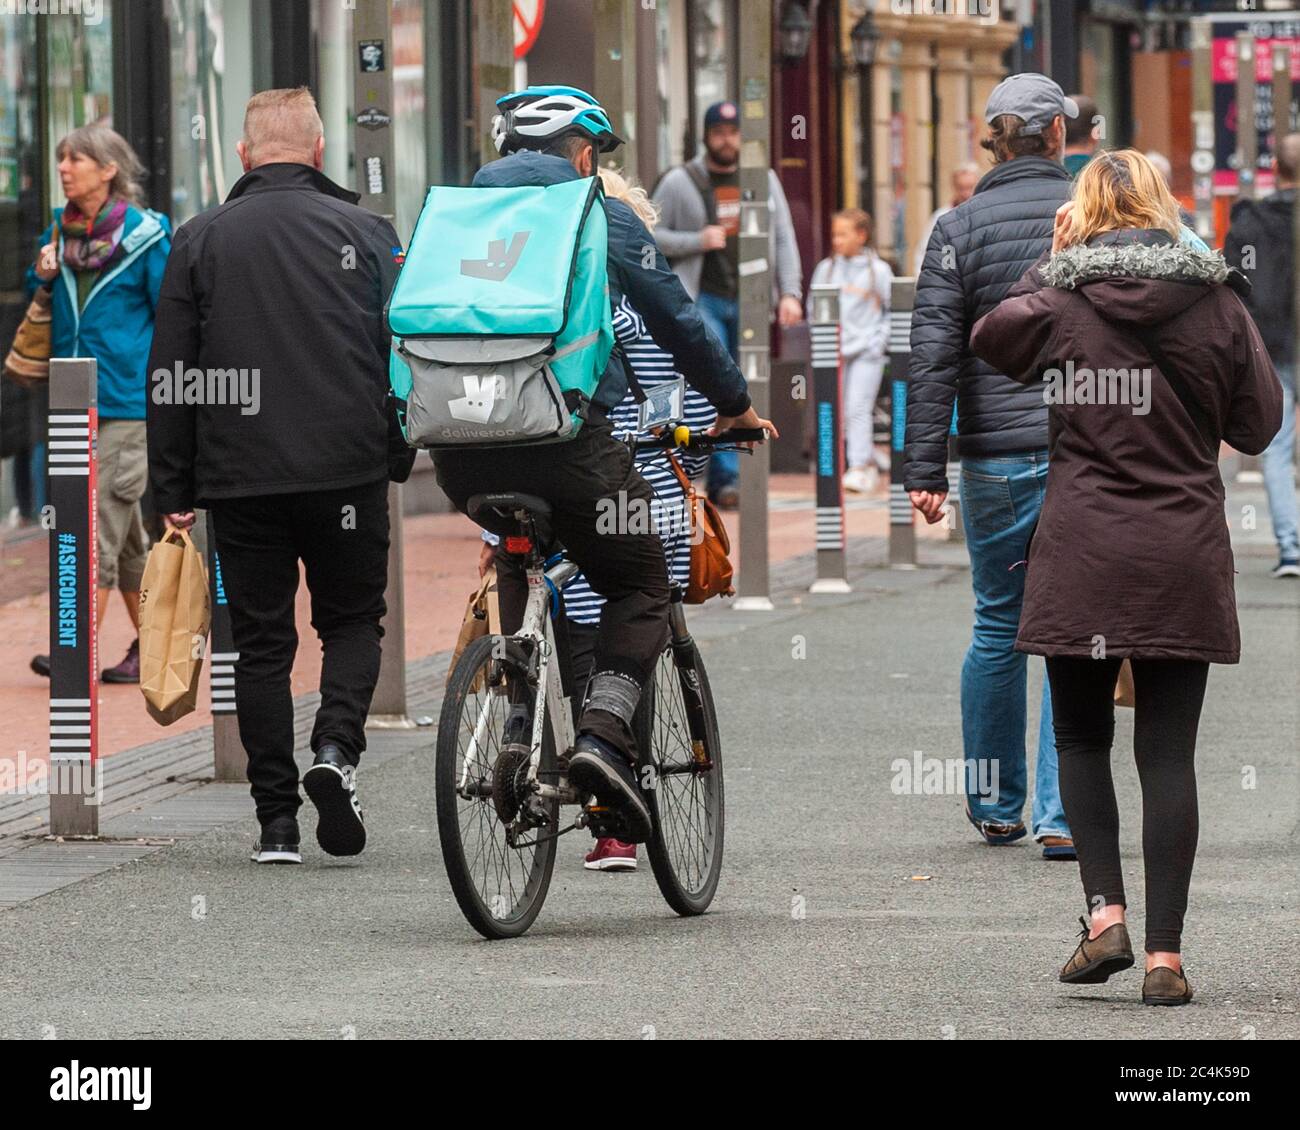 Lieferung Food Delivery Rider in Cork City, Irland. Stockfoto